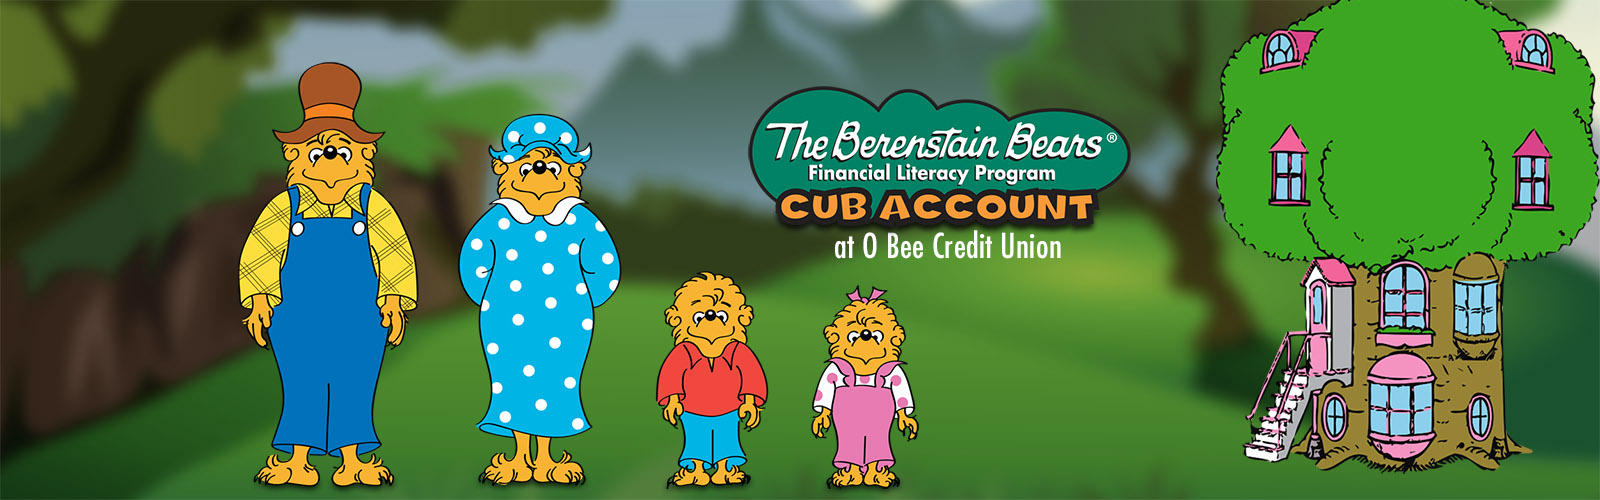 The Berenstain Bears financial literacy, financial education for youth